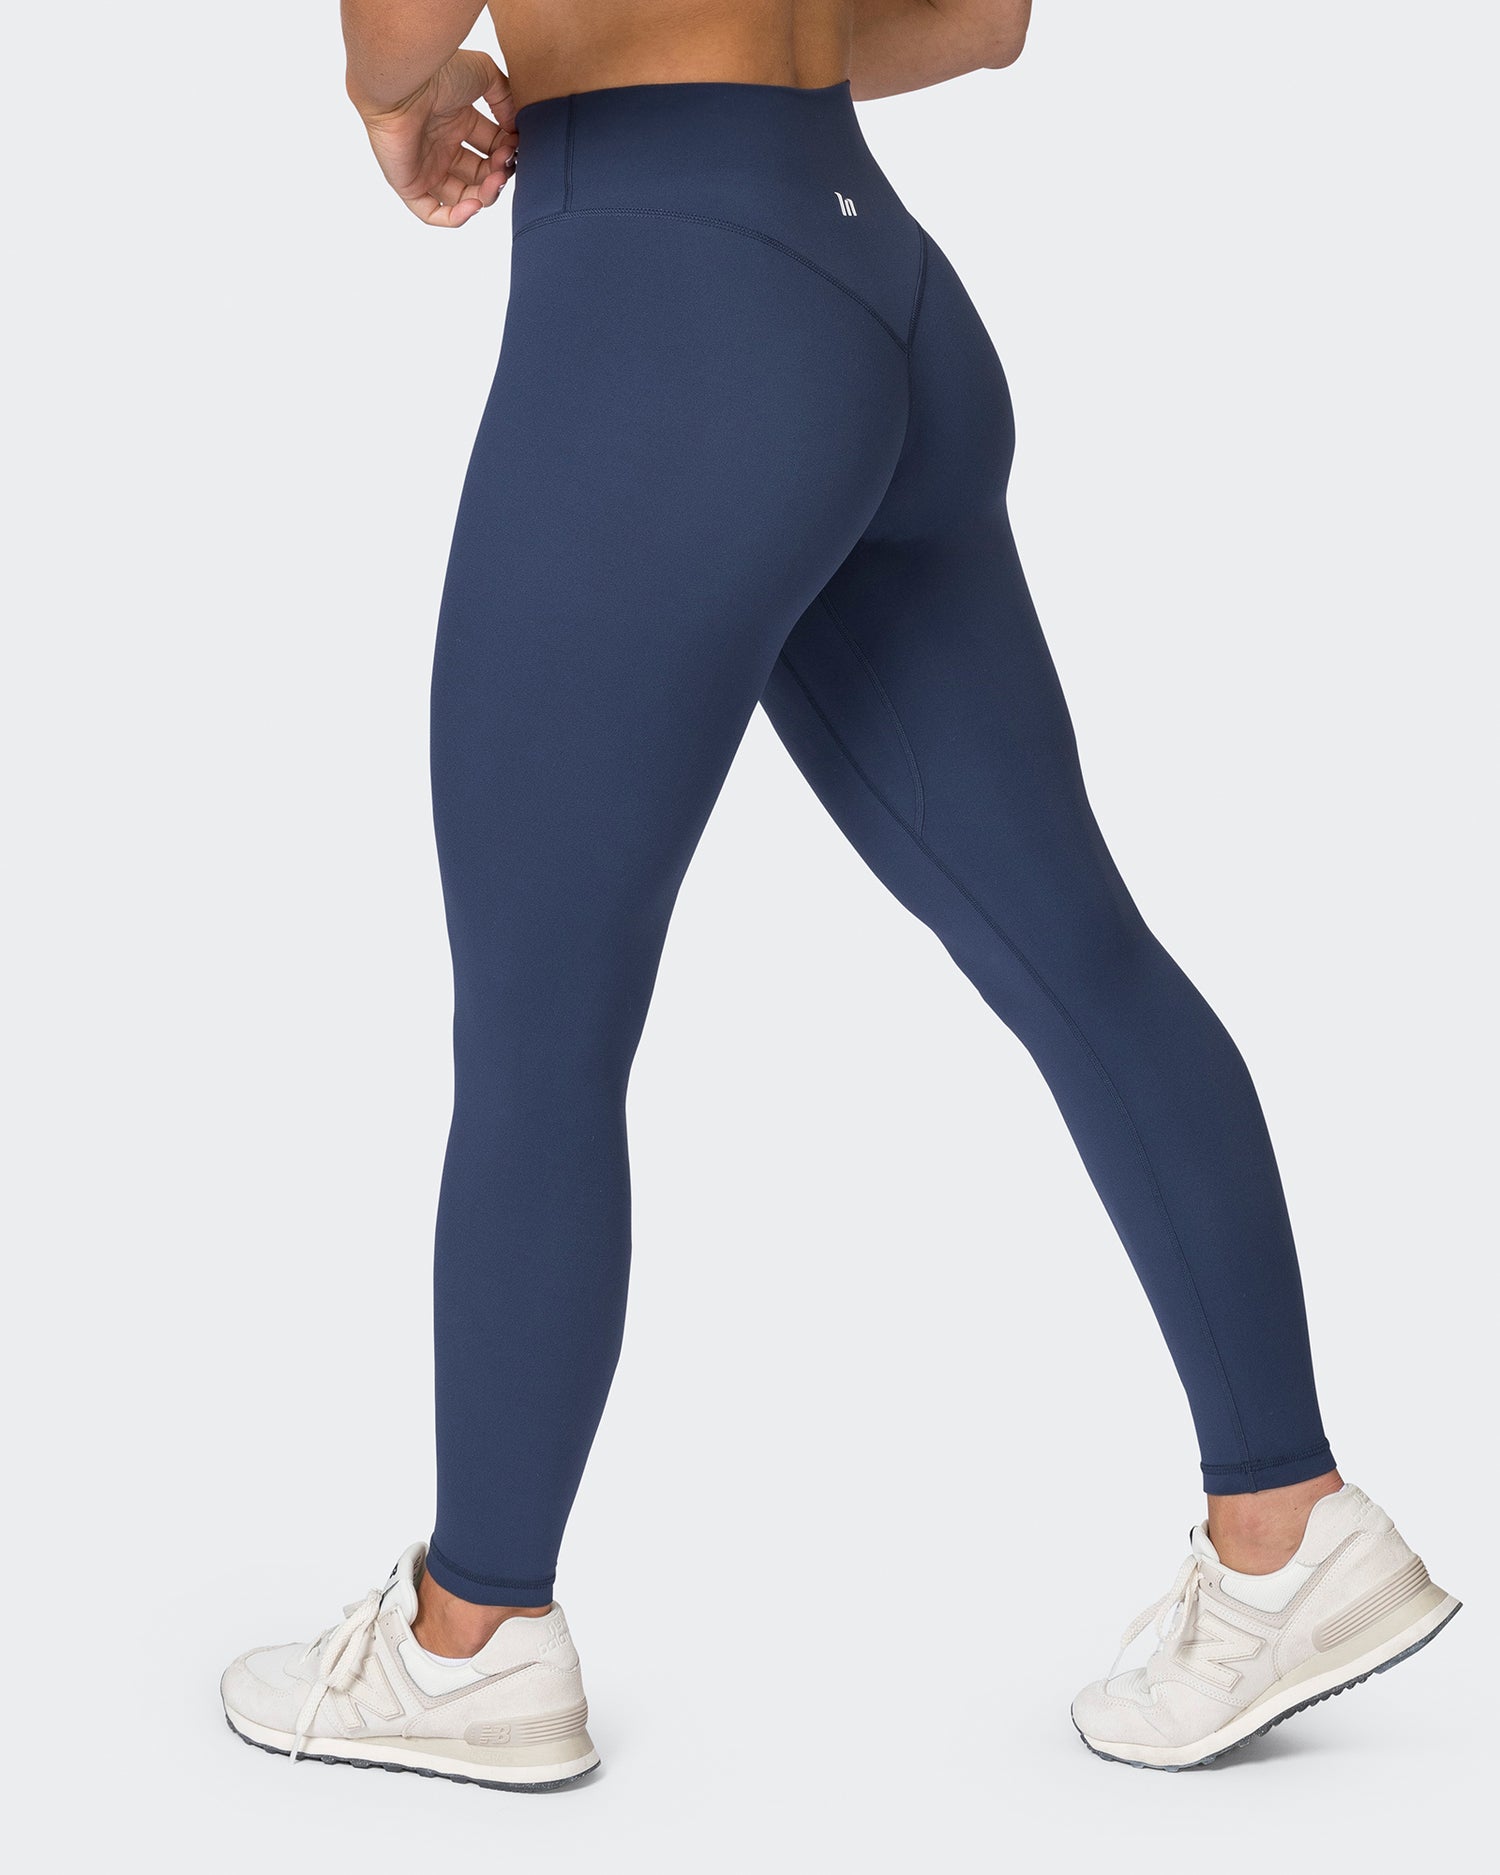 Liberty Zero Rise Ankle Length Leggings - Spellbound - Muscle Nation